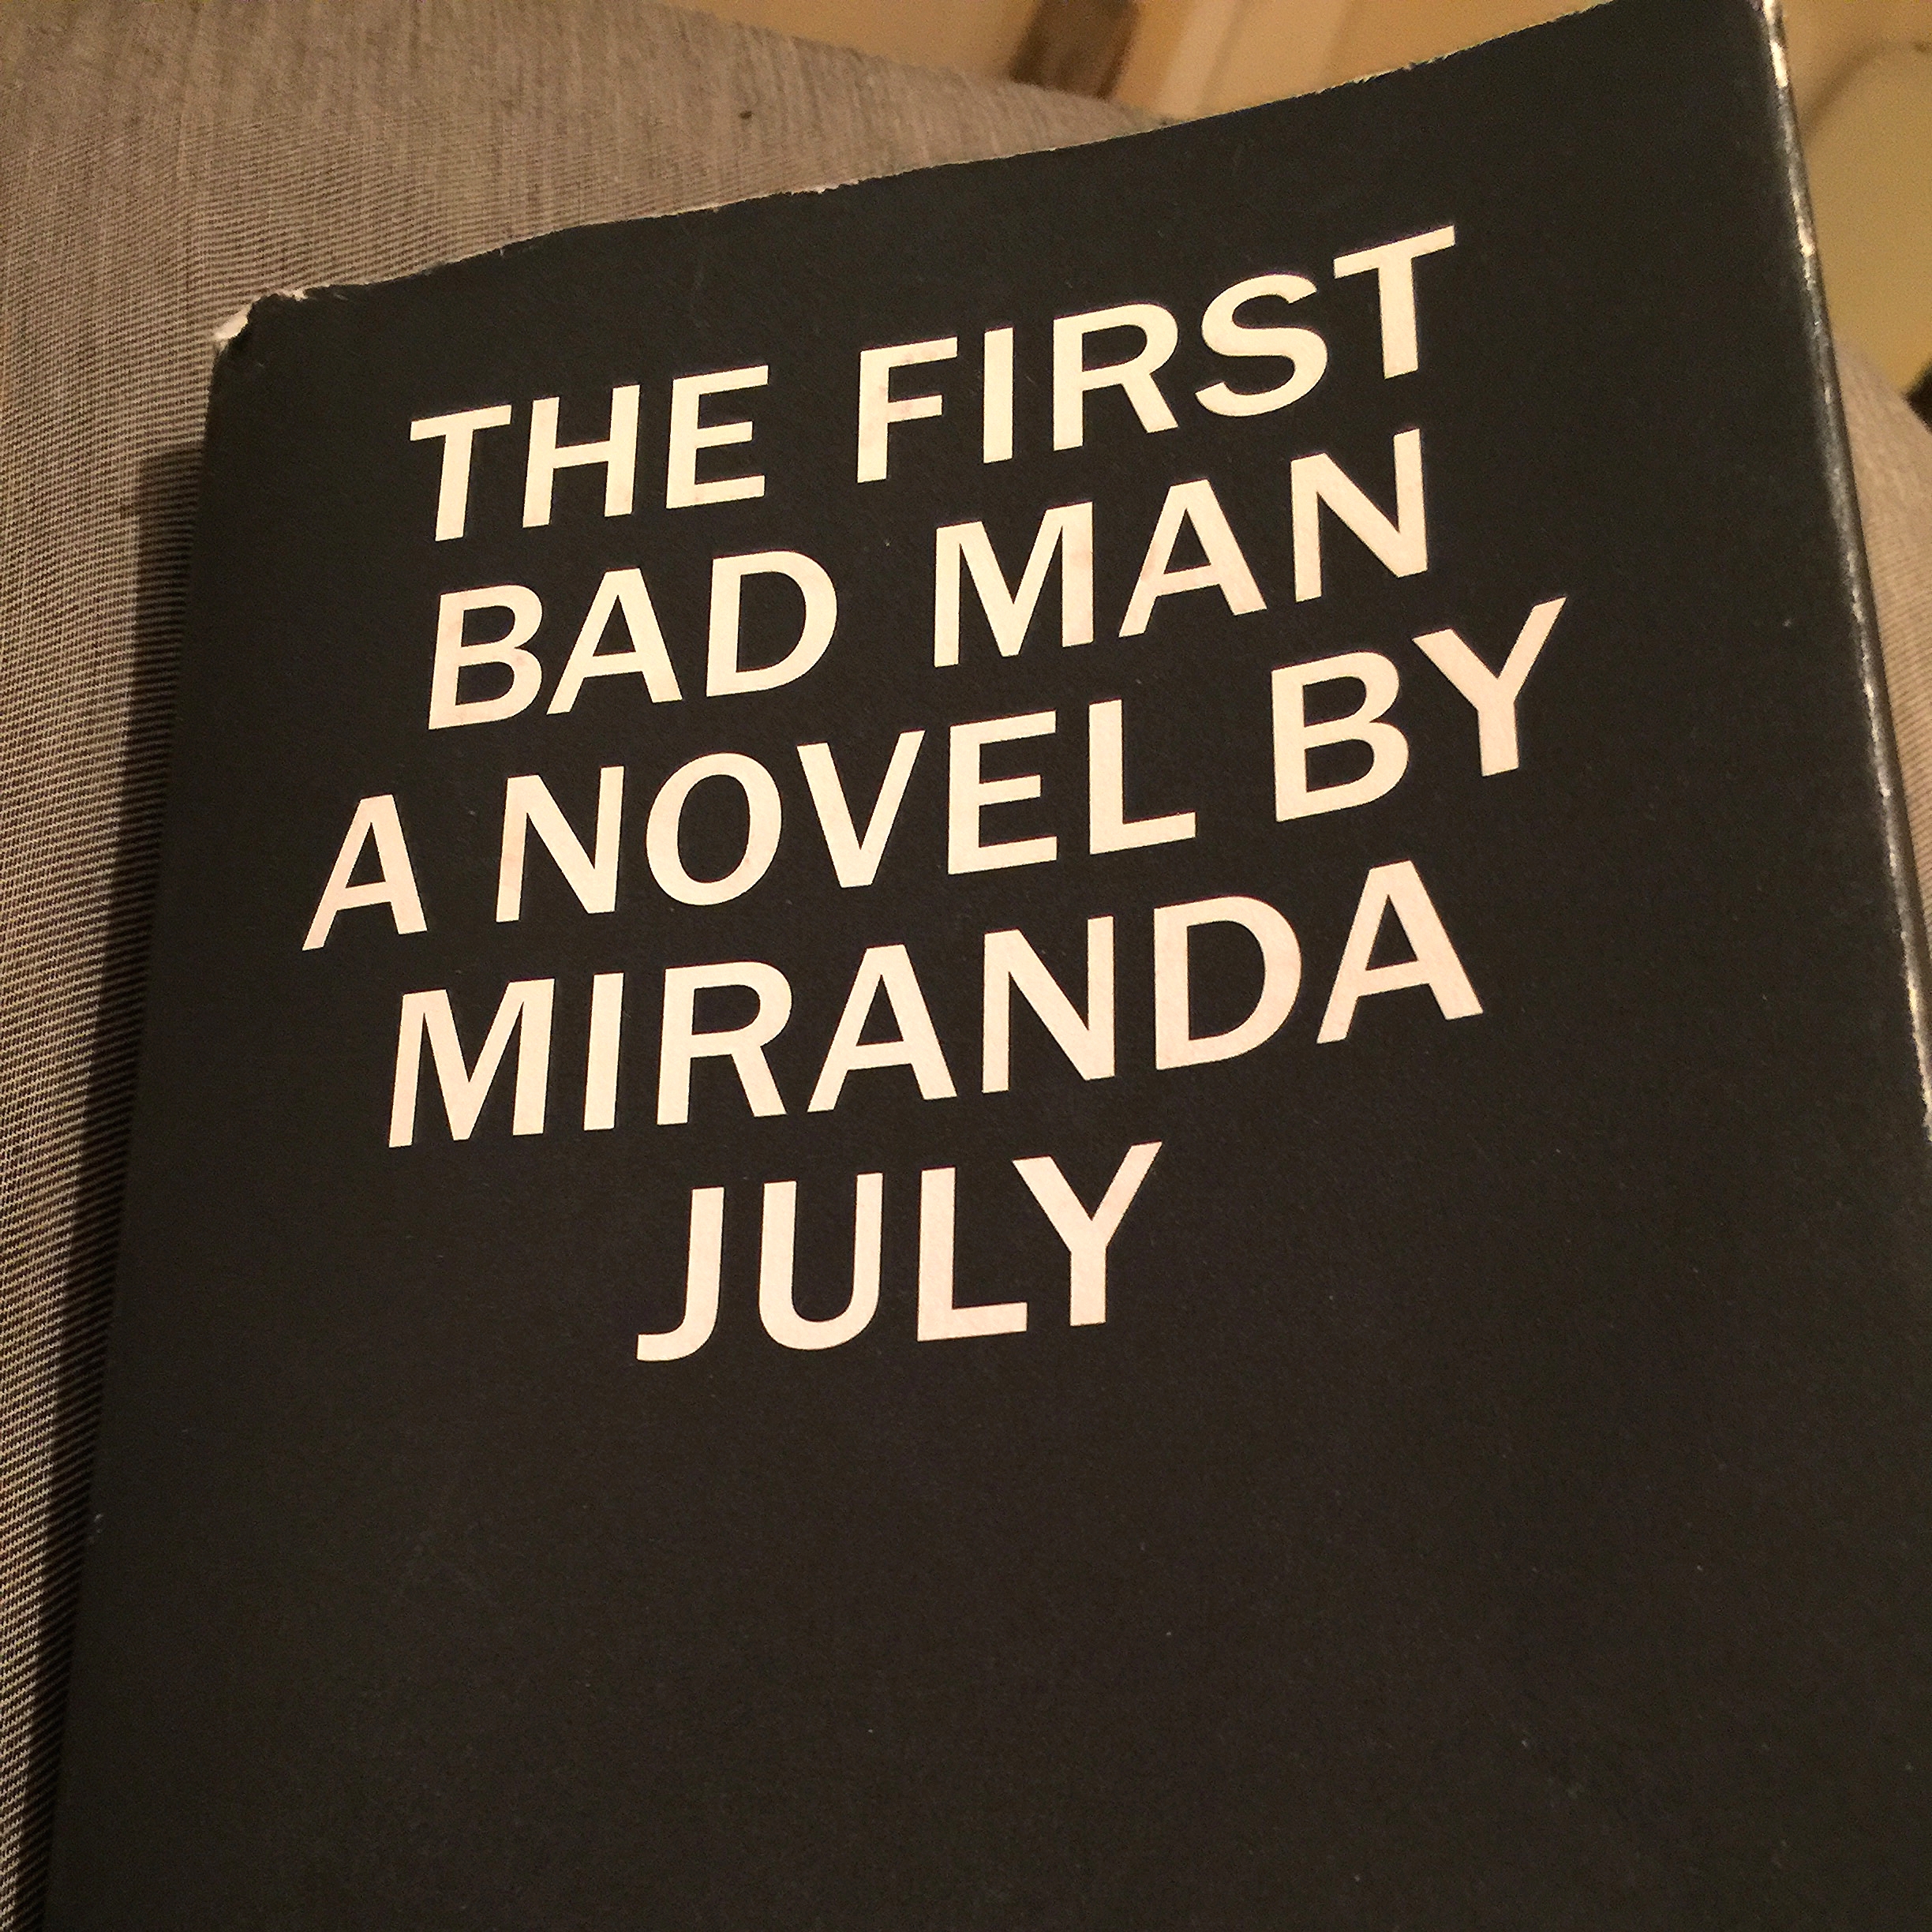   Marla's latest reading material, 'The First Bad Man.'  